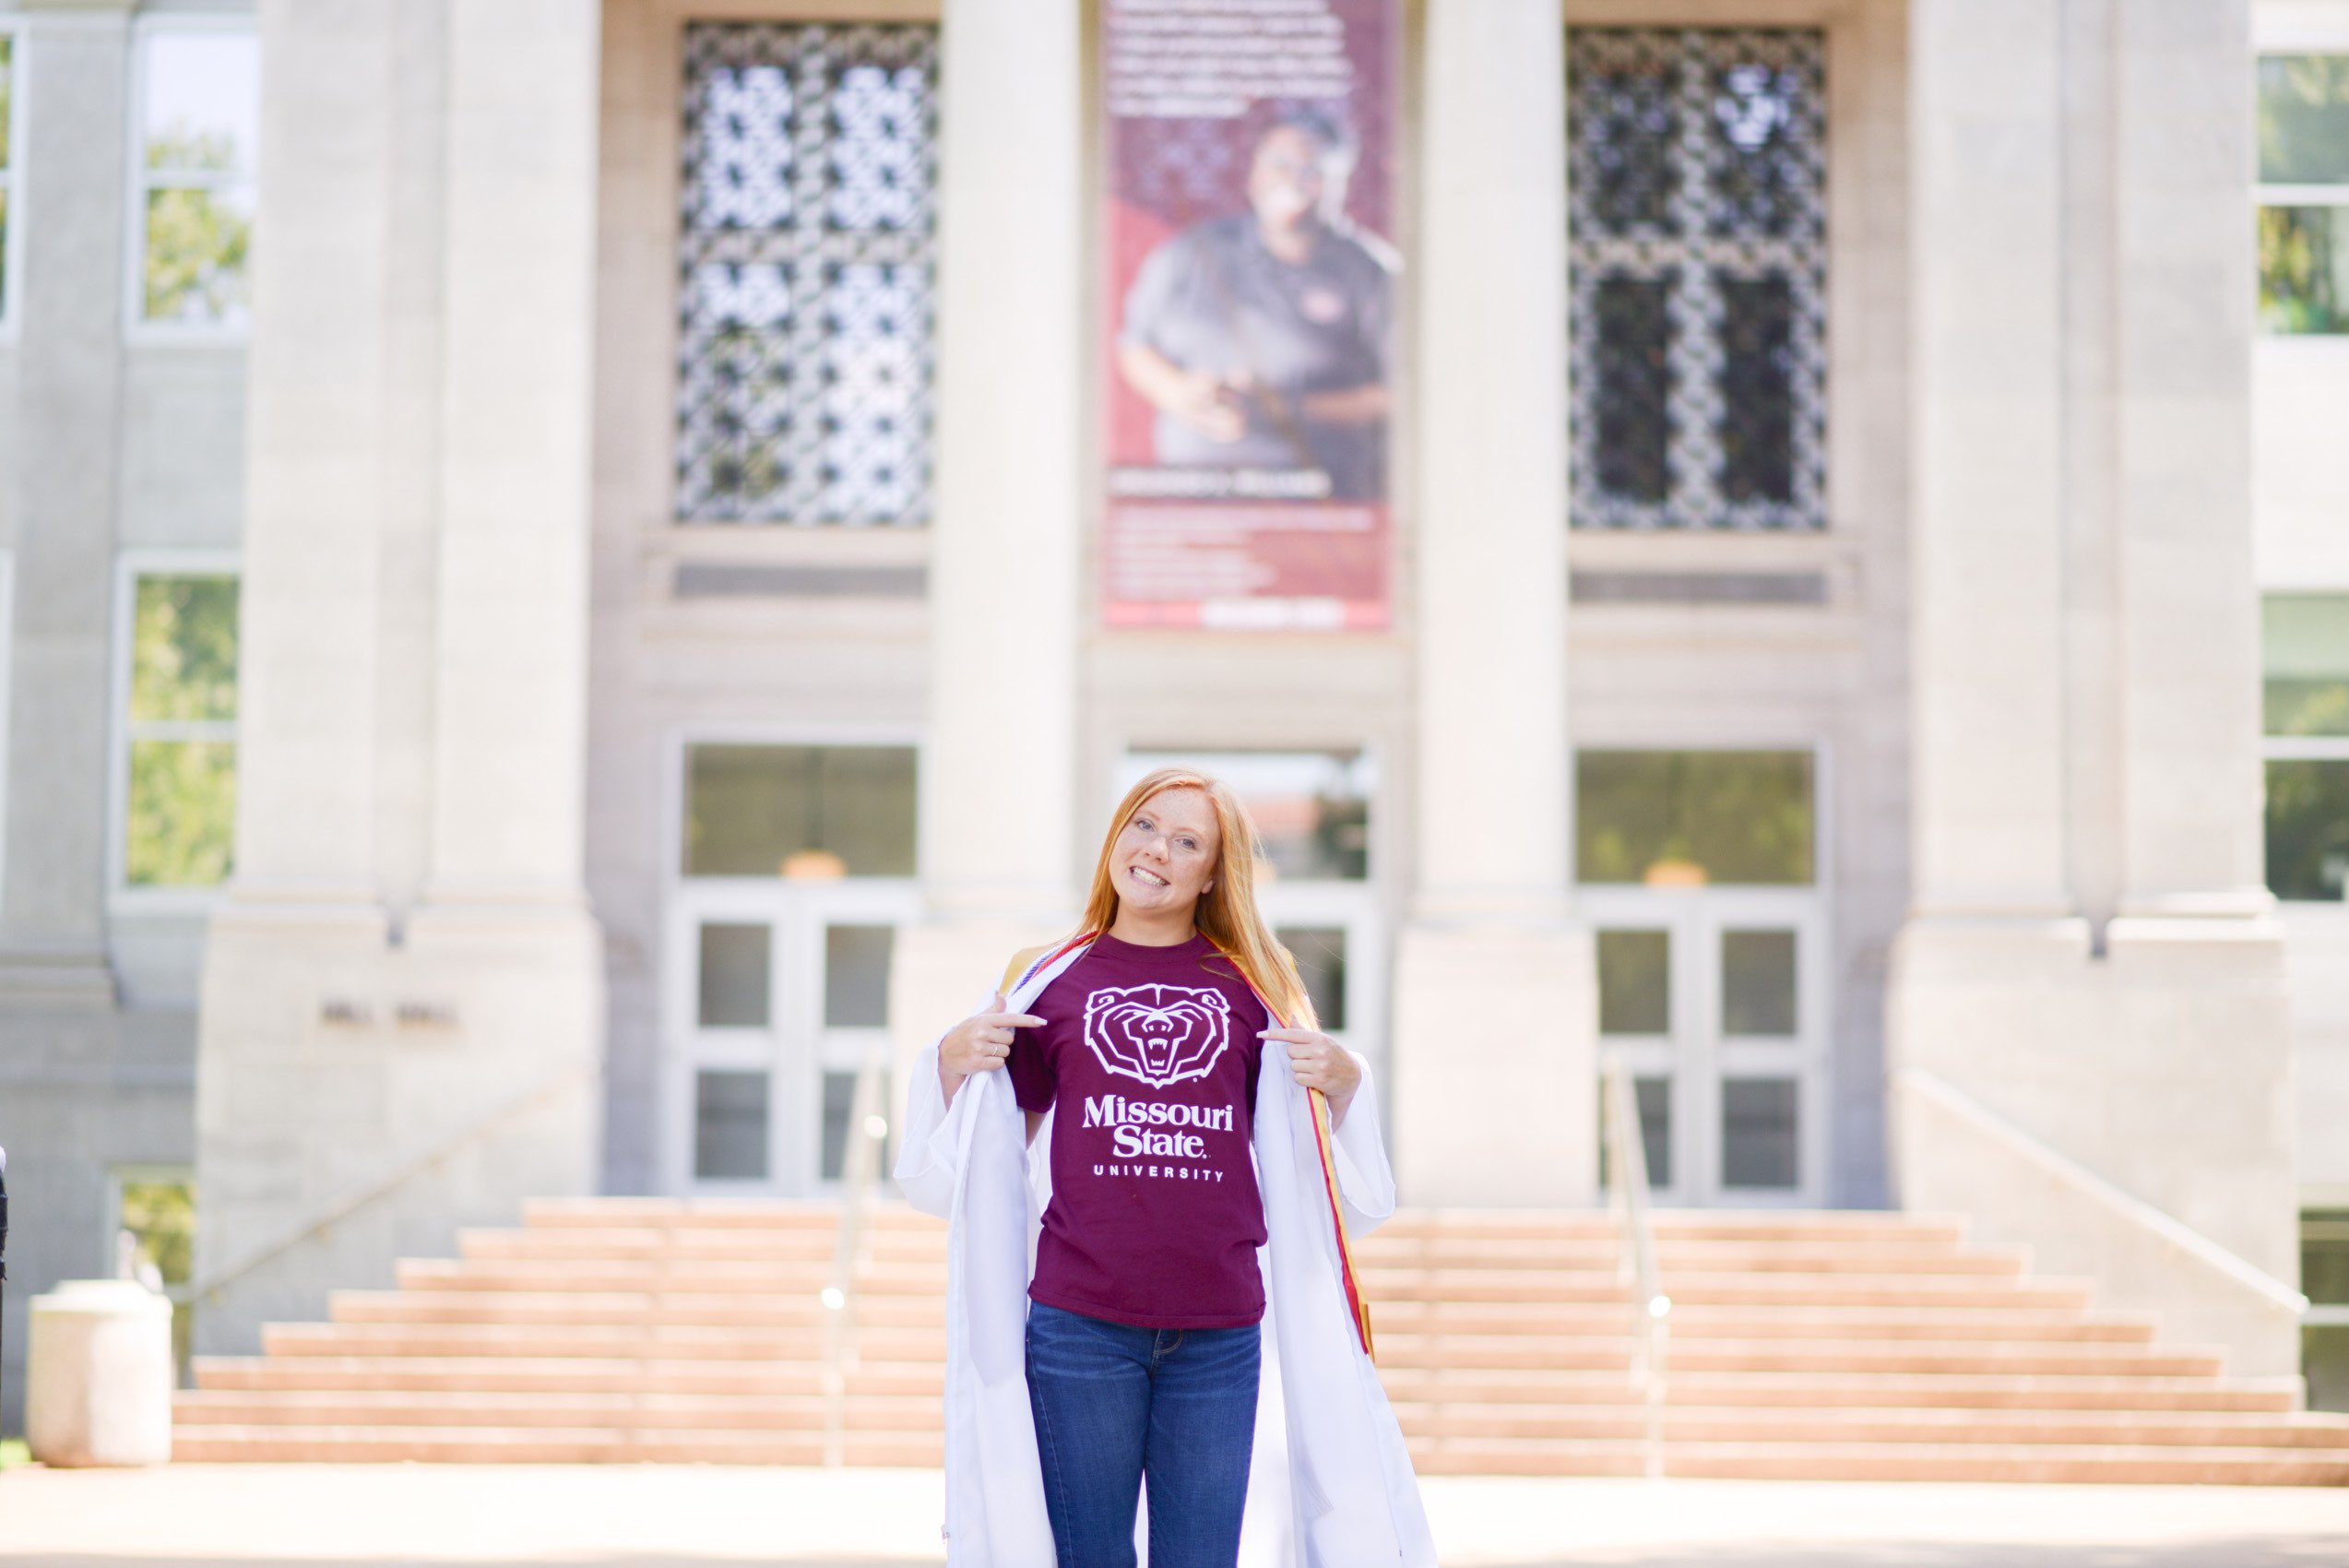 Senior girl in maroon tshirt and graduation robe standing in front of Missouri State University.